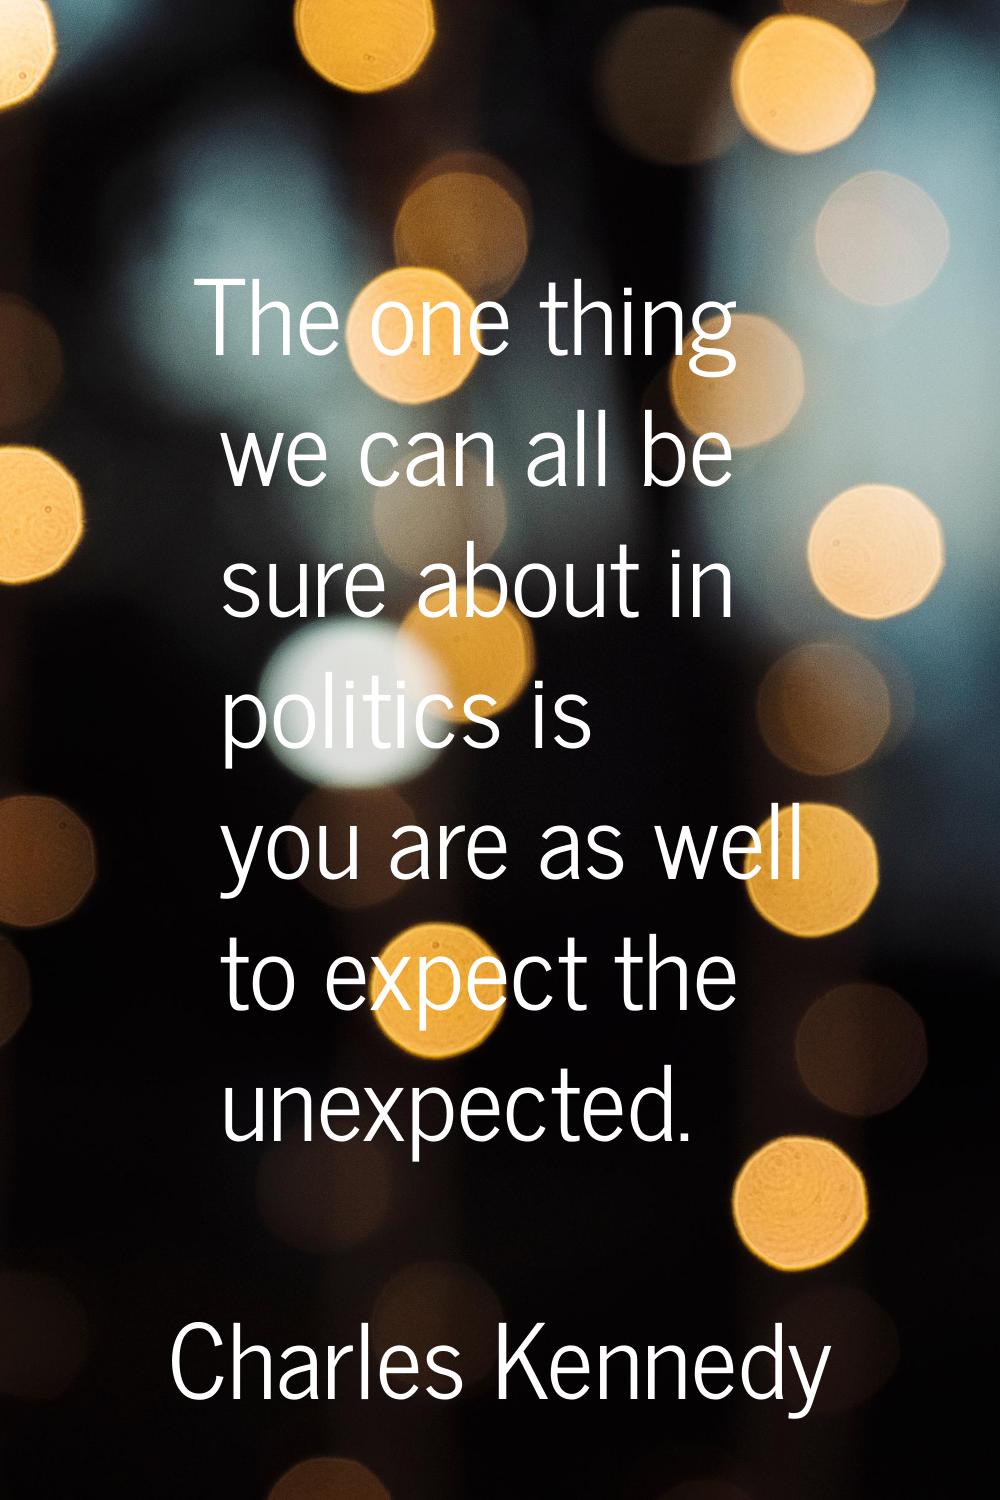 The one thing we can all be sure about in politics is you are as well to expect the unexpected.